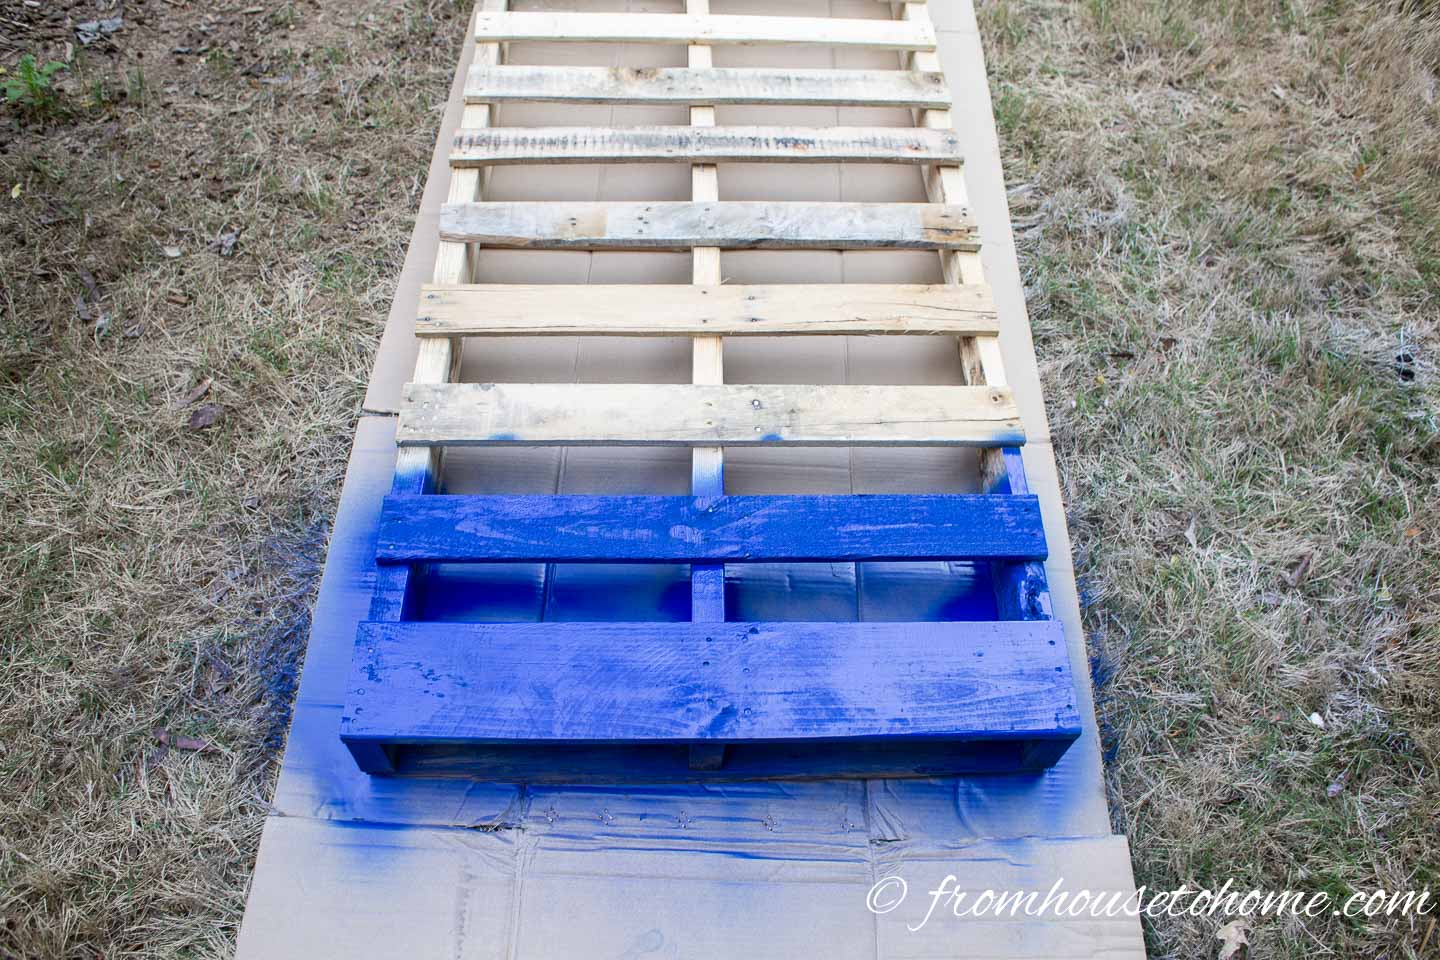 Bottom two slats of a pallet painted dark blue